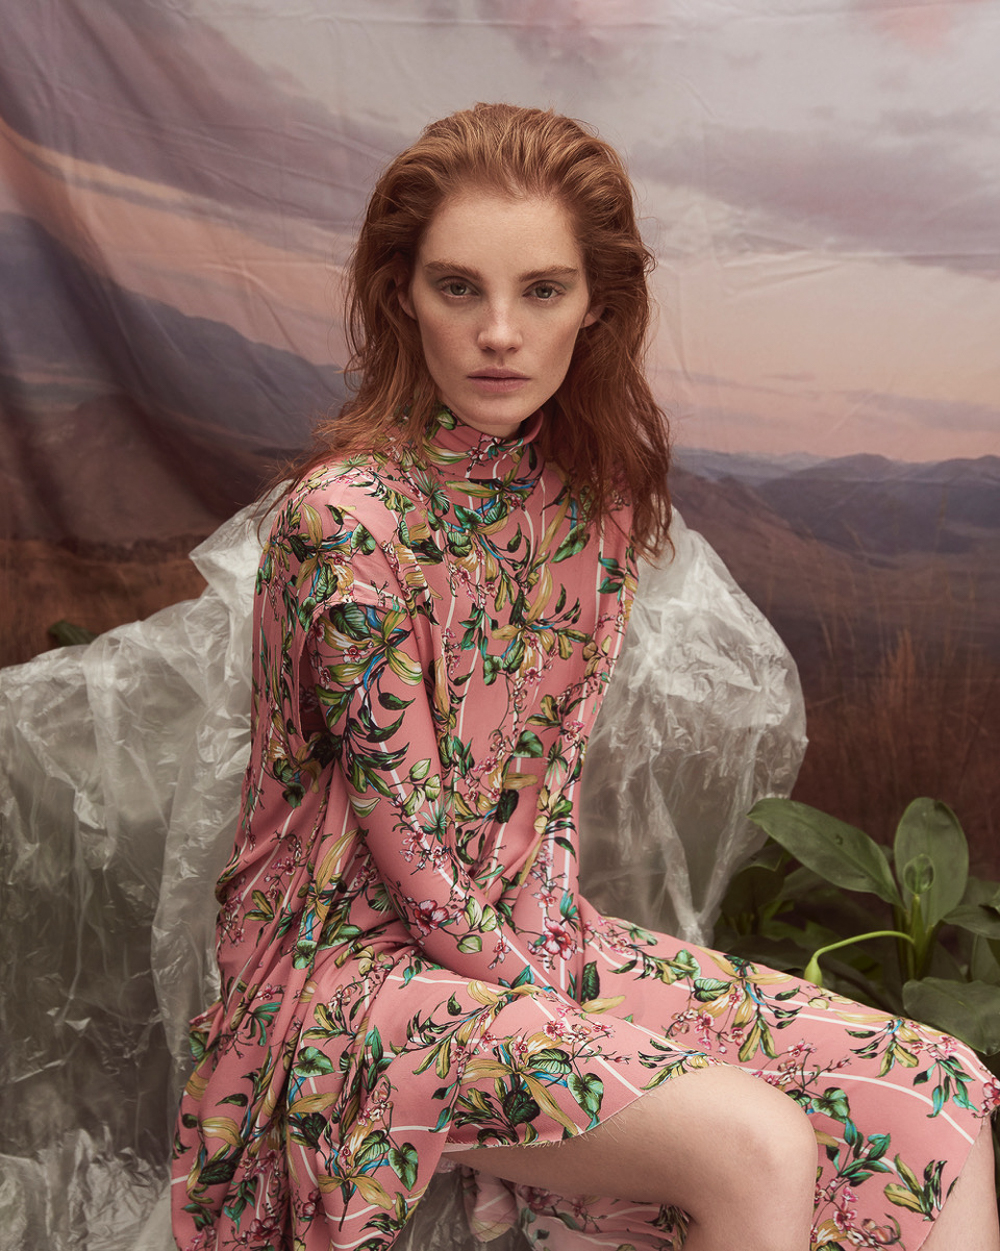 Andreas Ortner for Marie Claire with Alexina Graham